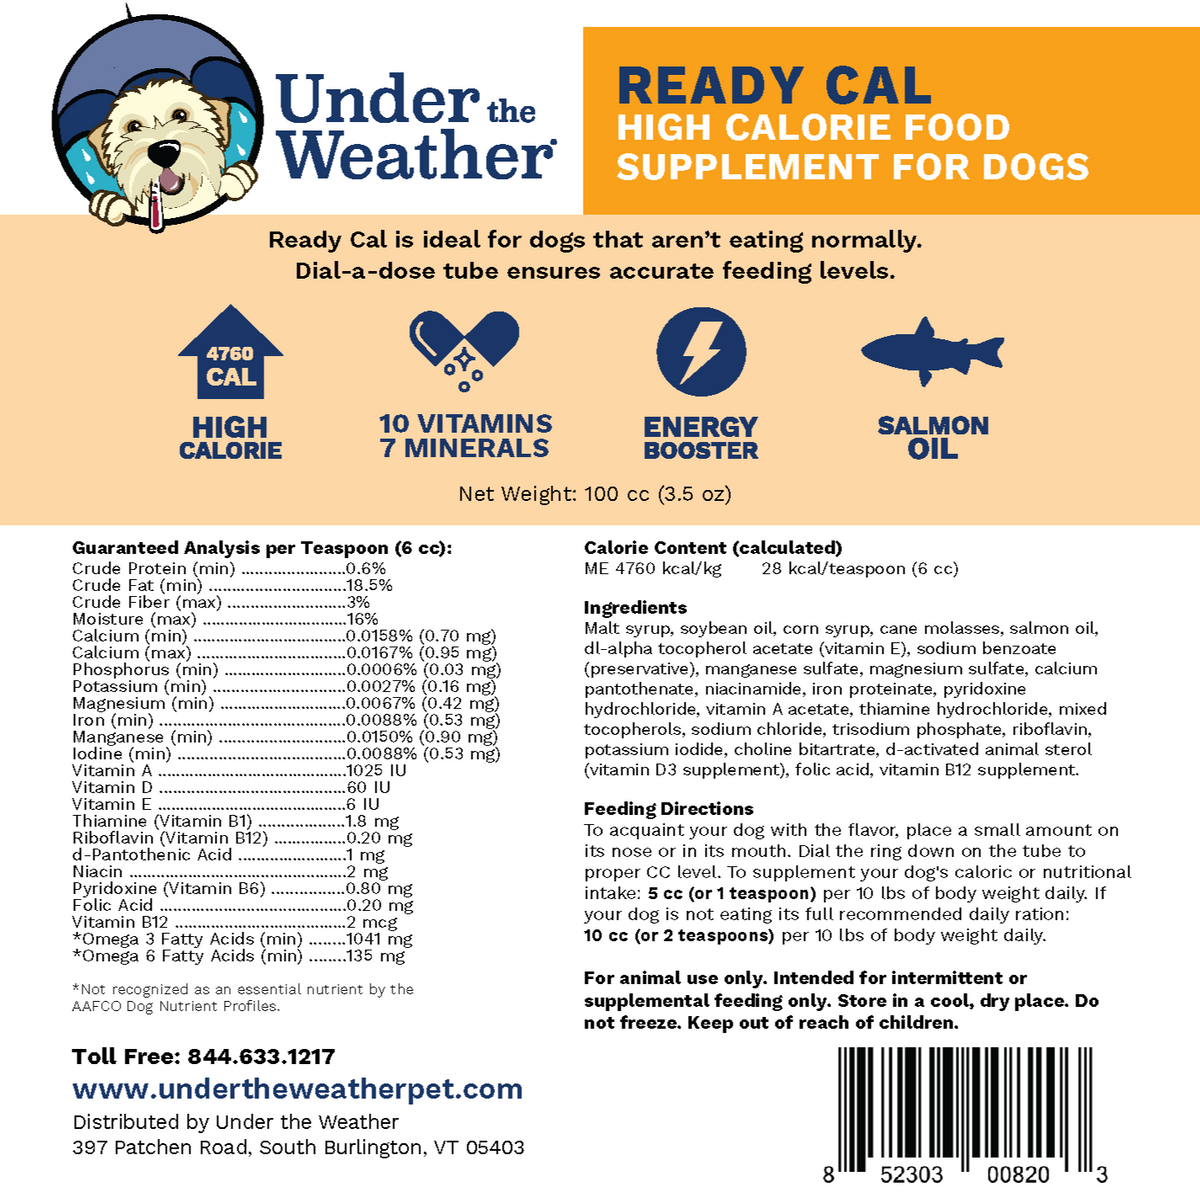 Under the Weather for Dogs - Ready Cal Nutritional Supplement - 100 cc Dispenser